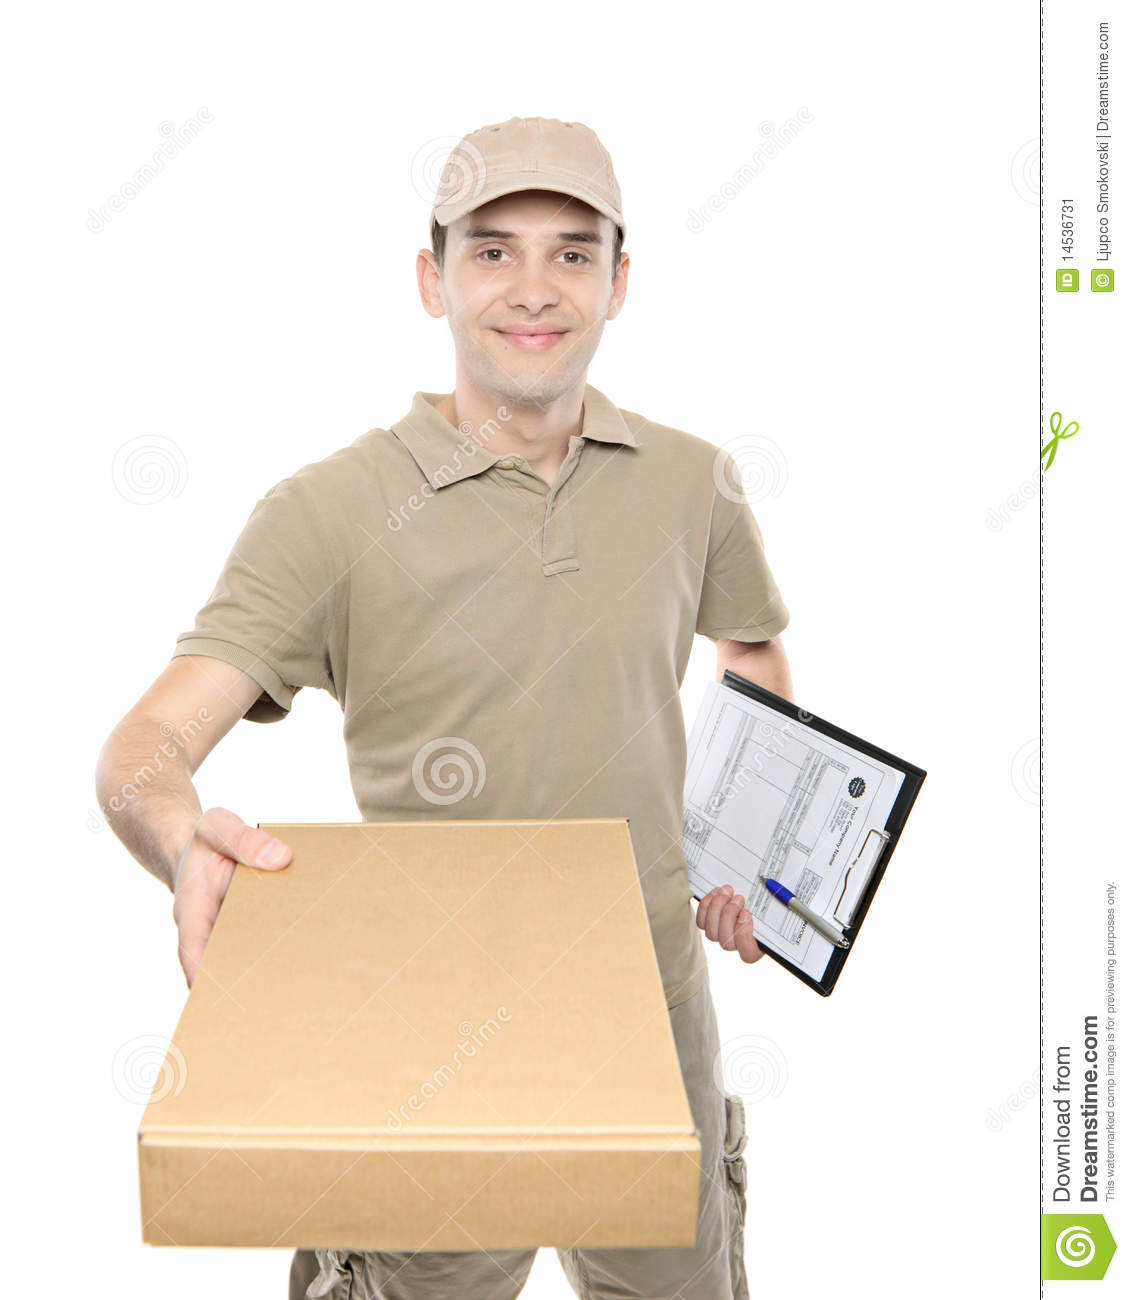 High Resolution Wallpaper | Delivery Man 1130x1300 px